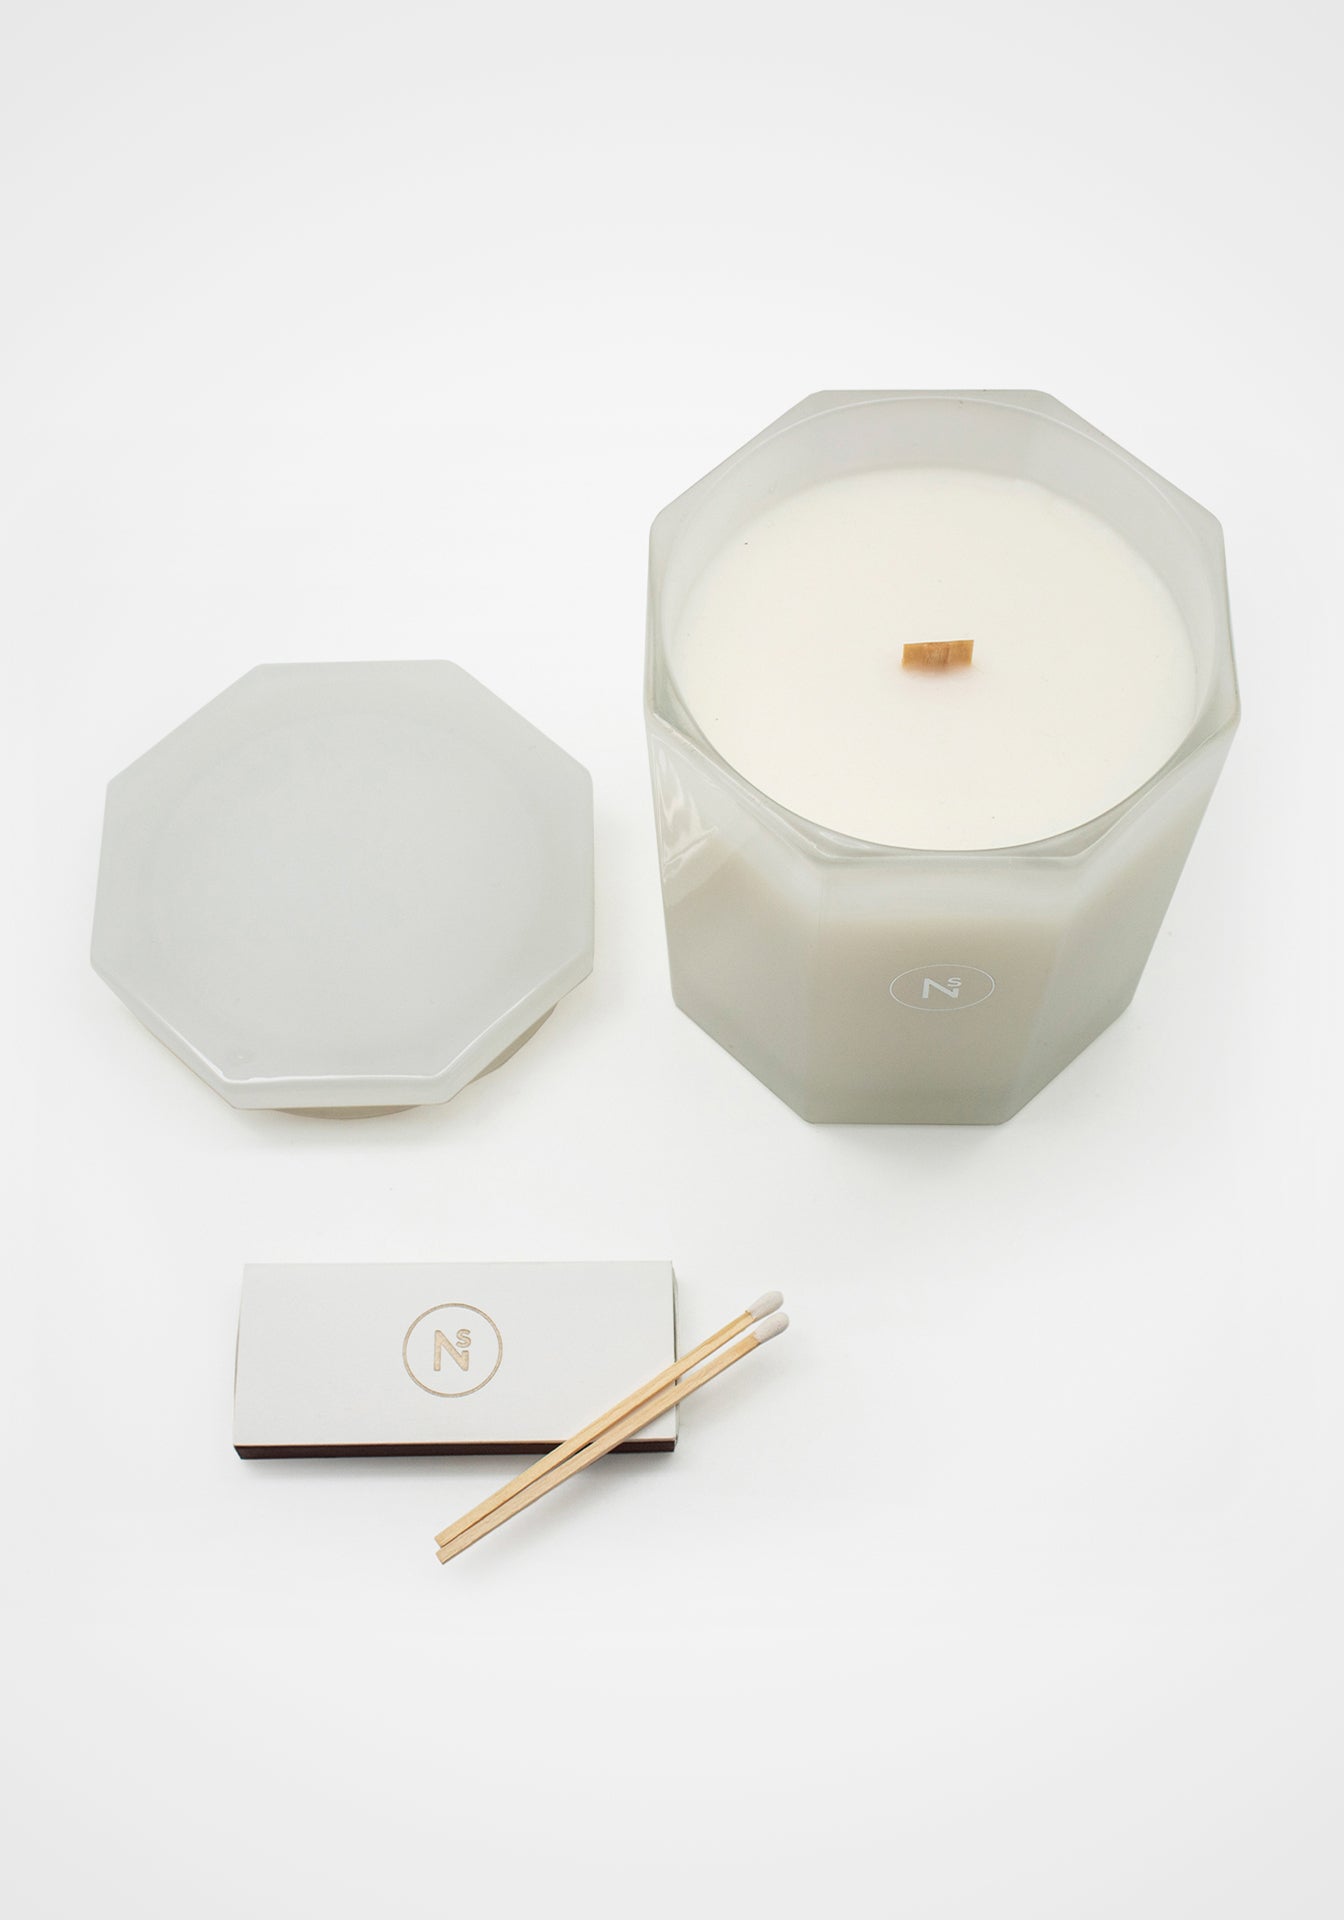 Wild Lilac, Herbarium Collection Candle